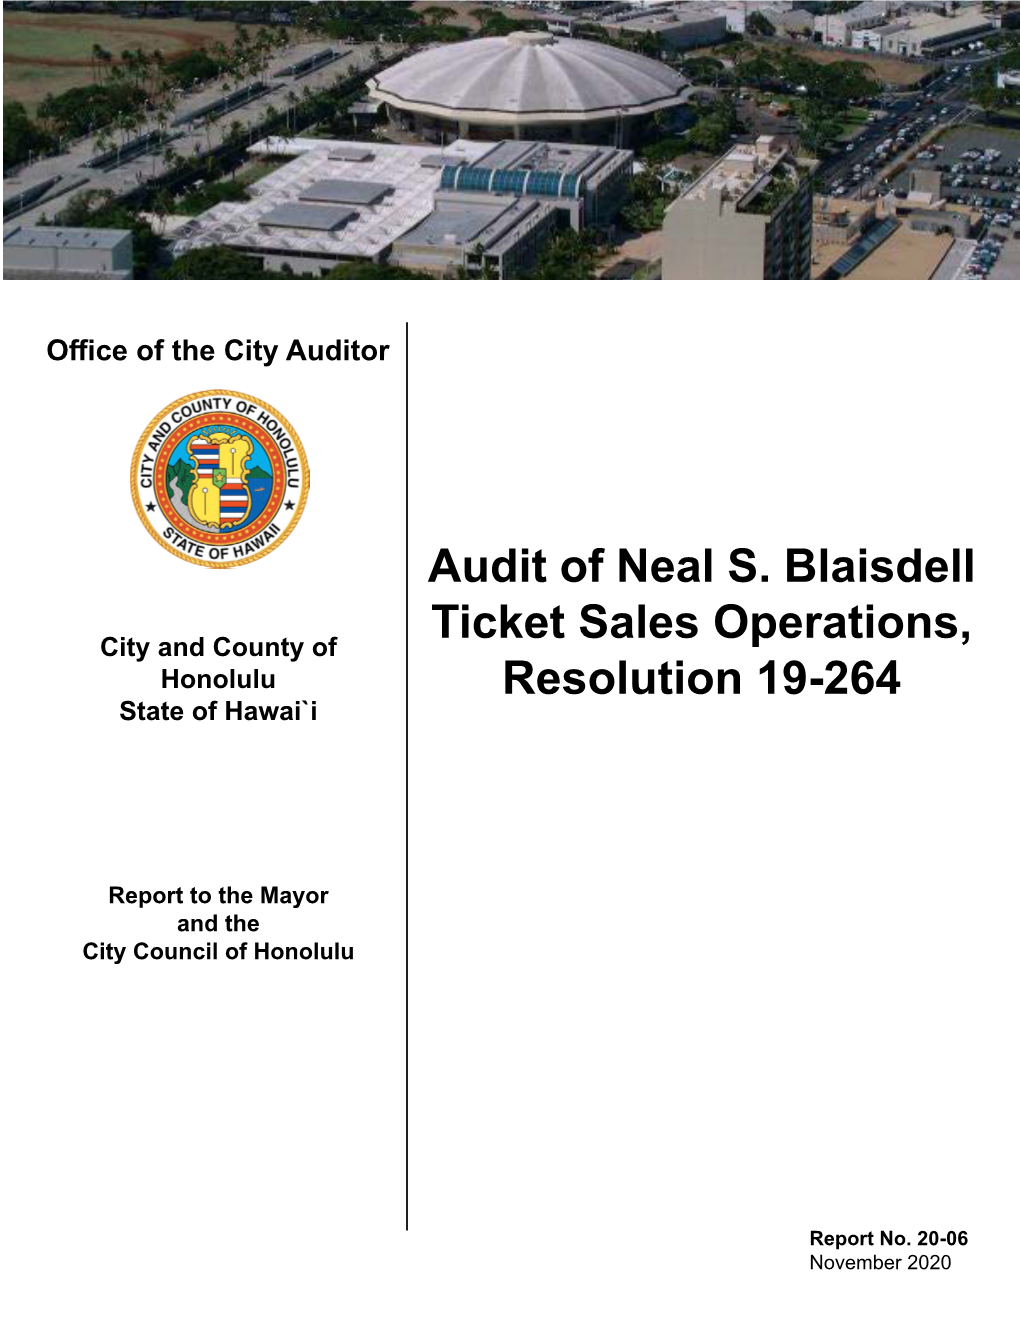 Audit of Neal S. Blaisdell Ticket Sales Operations, Resolution 19-264